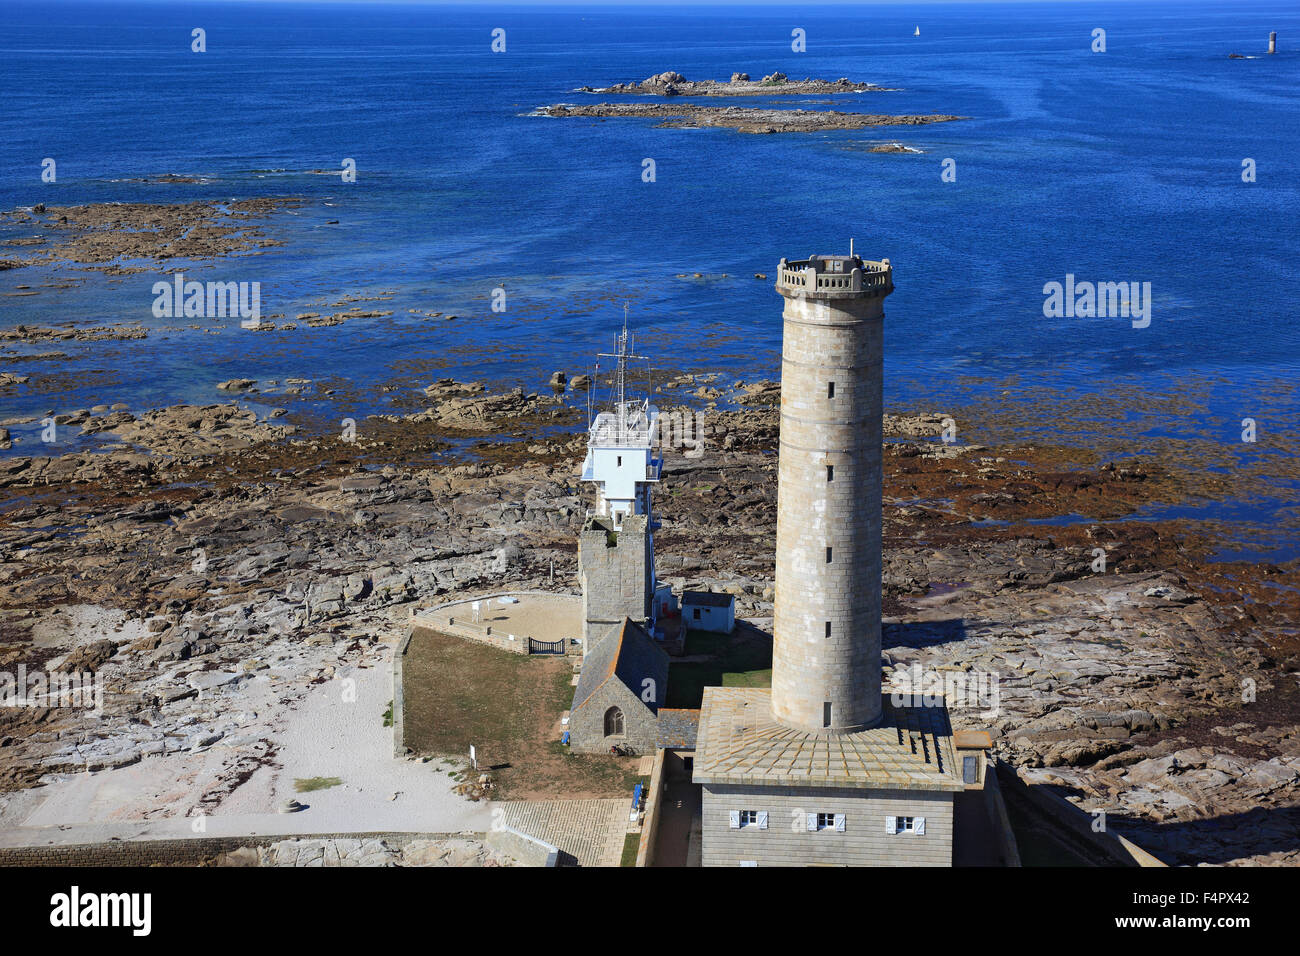 France, Brittany, view from the lighthouse Phare Echmuehl auf das Leuchtfeuer Vieille tour, die Kapelle Saint-Pierre Calvary and Stock Photo